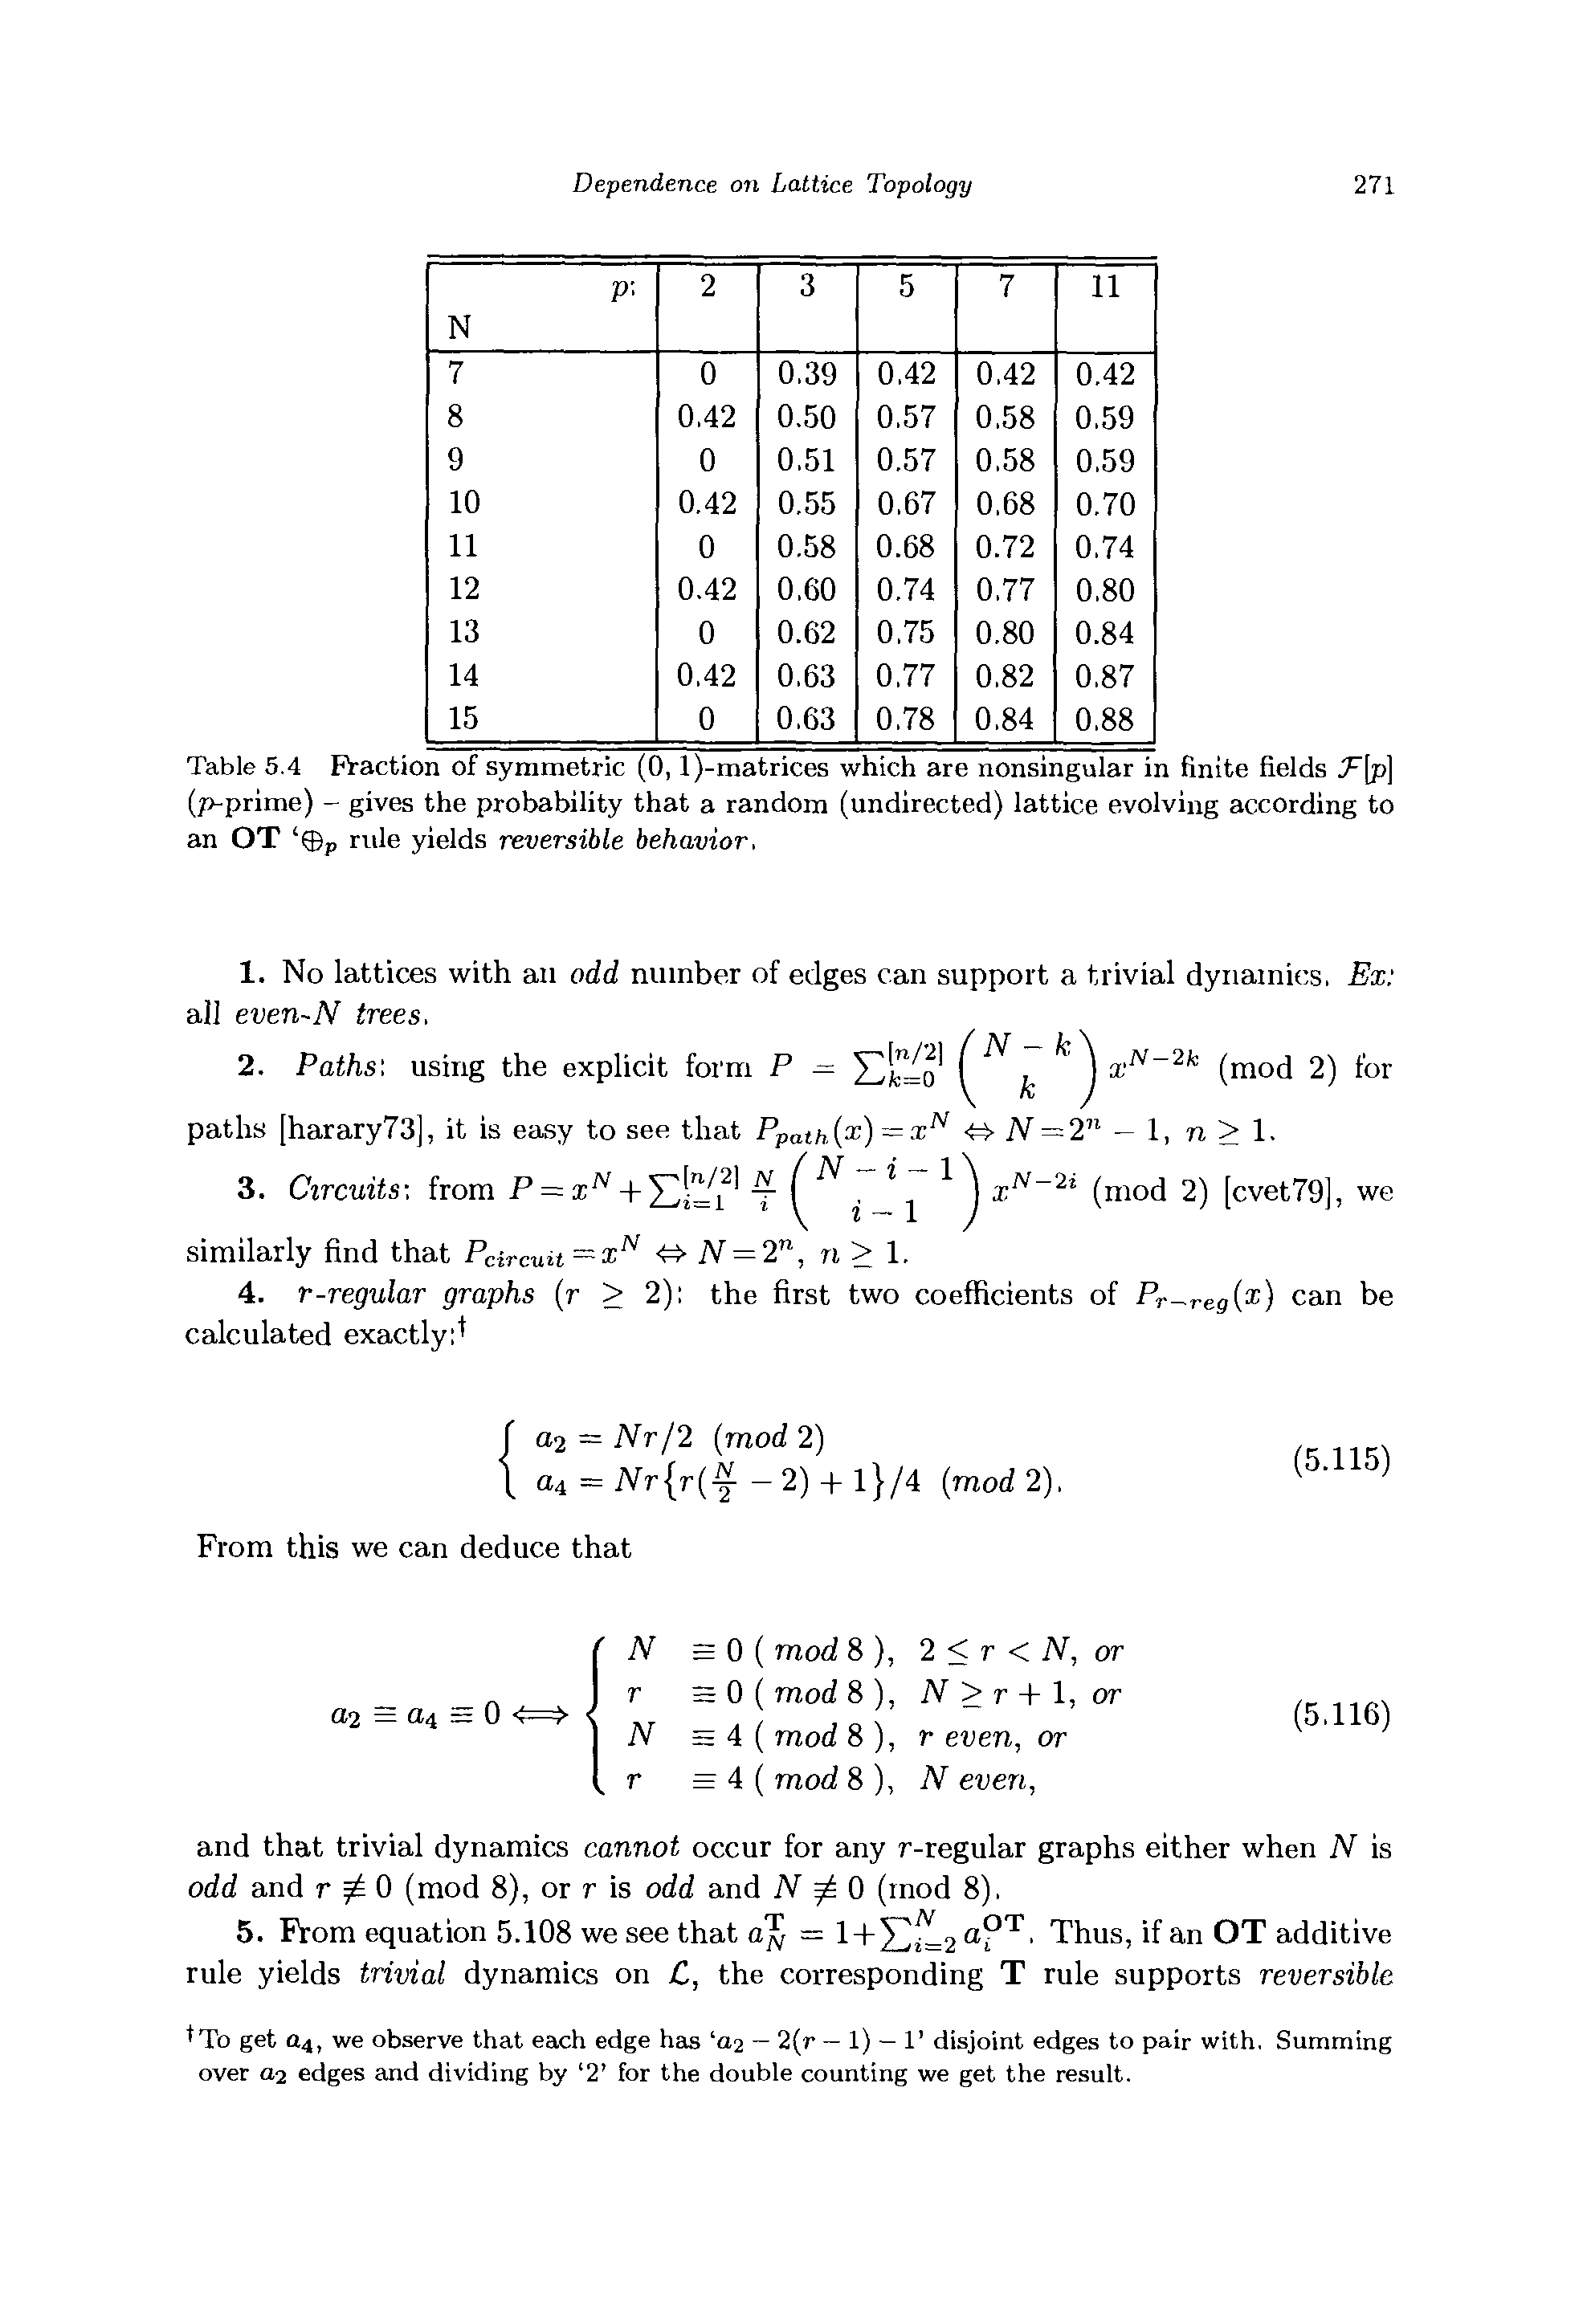 Table 5.4 FVaction of symmetric (0, l)-matrices which are nonsingular in finite fields T p (p-prime) - gives the probability that a random (undirected) lattice evolving according to an OT 0p rule yields reversible behavior.